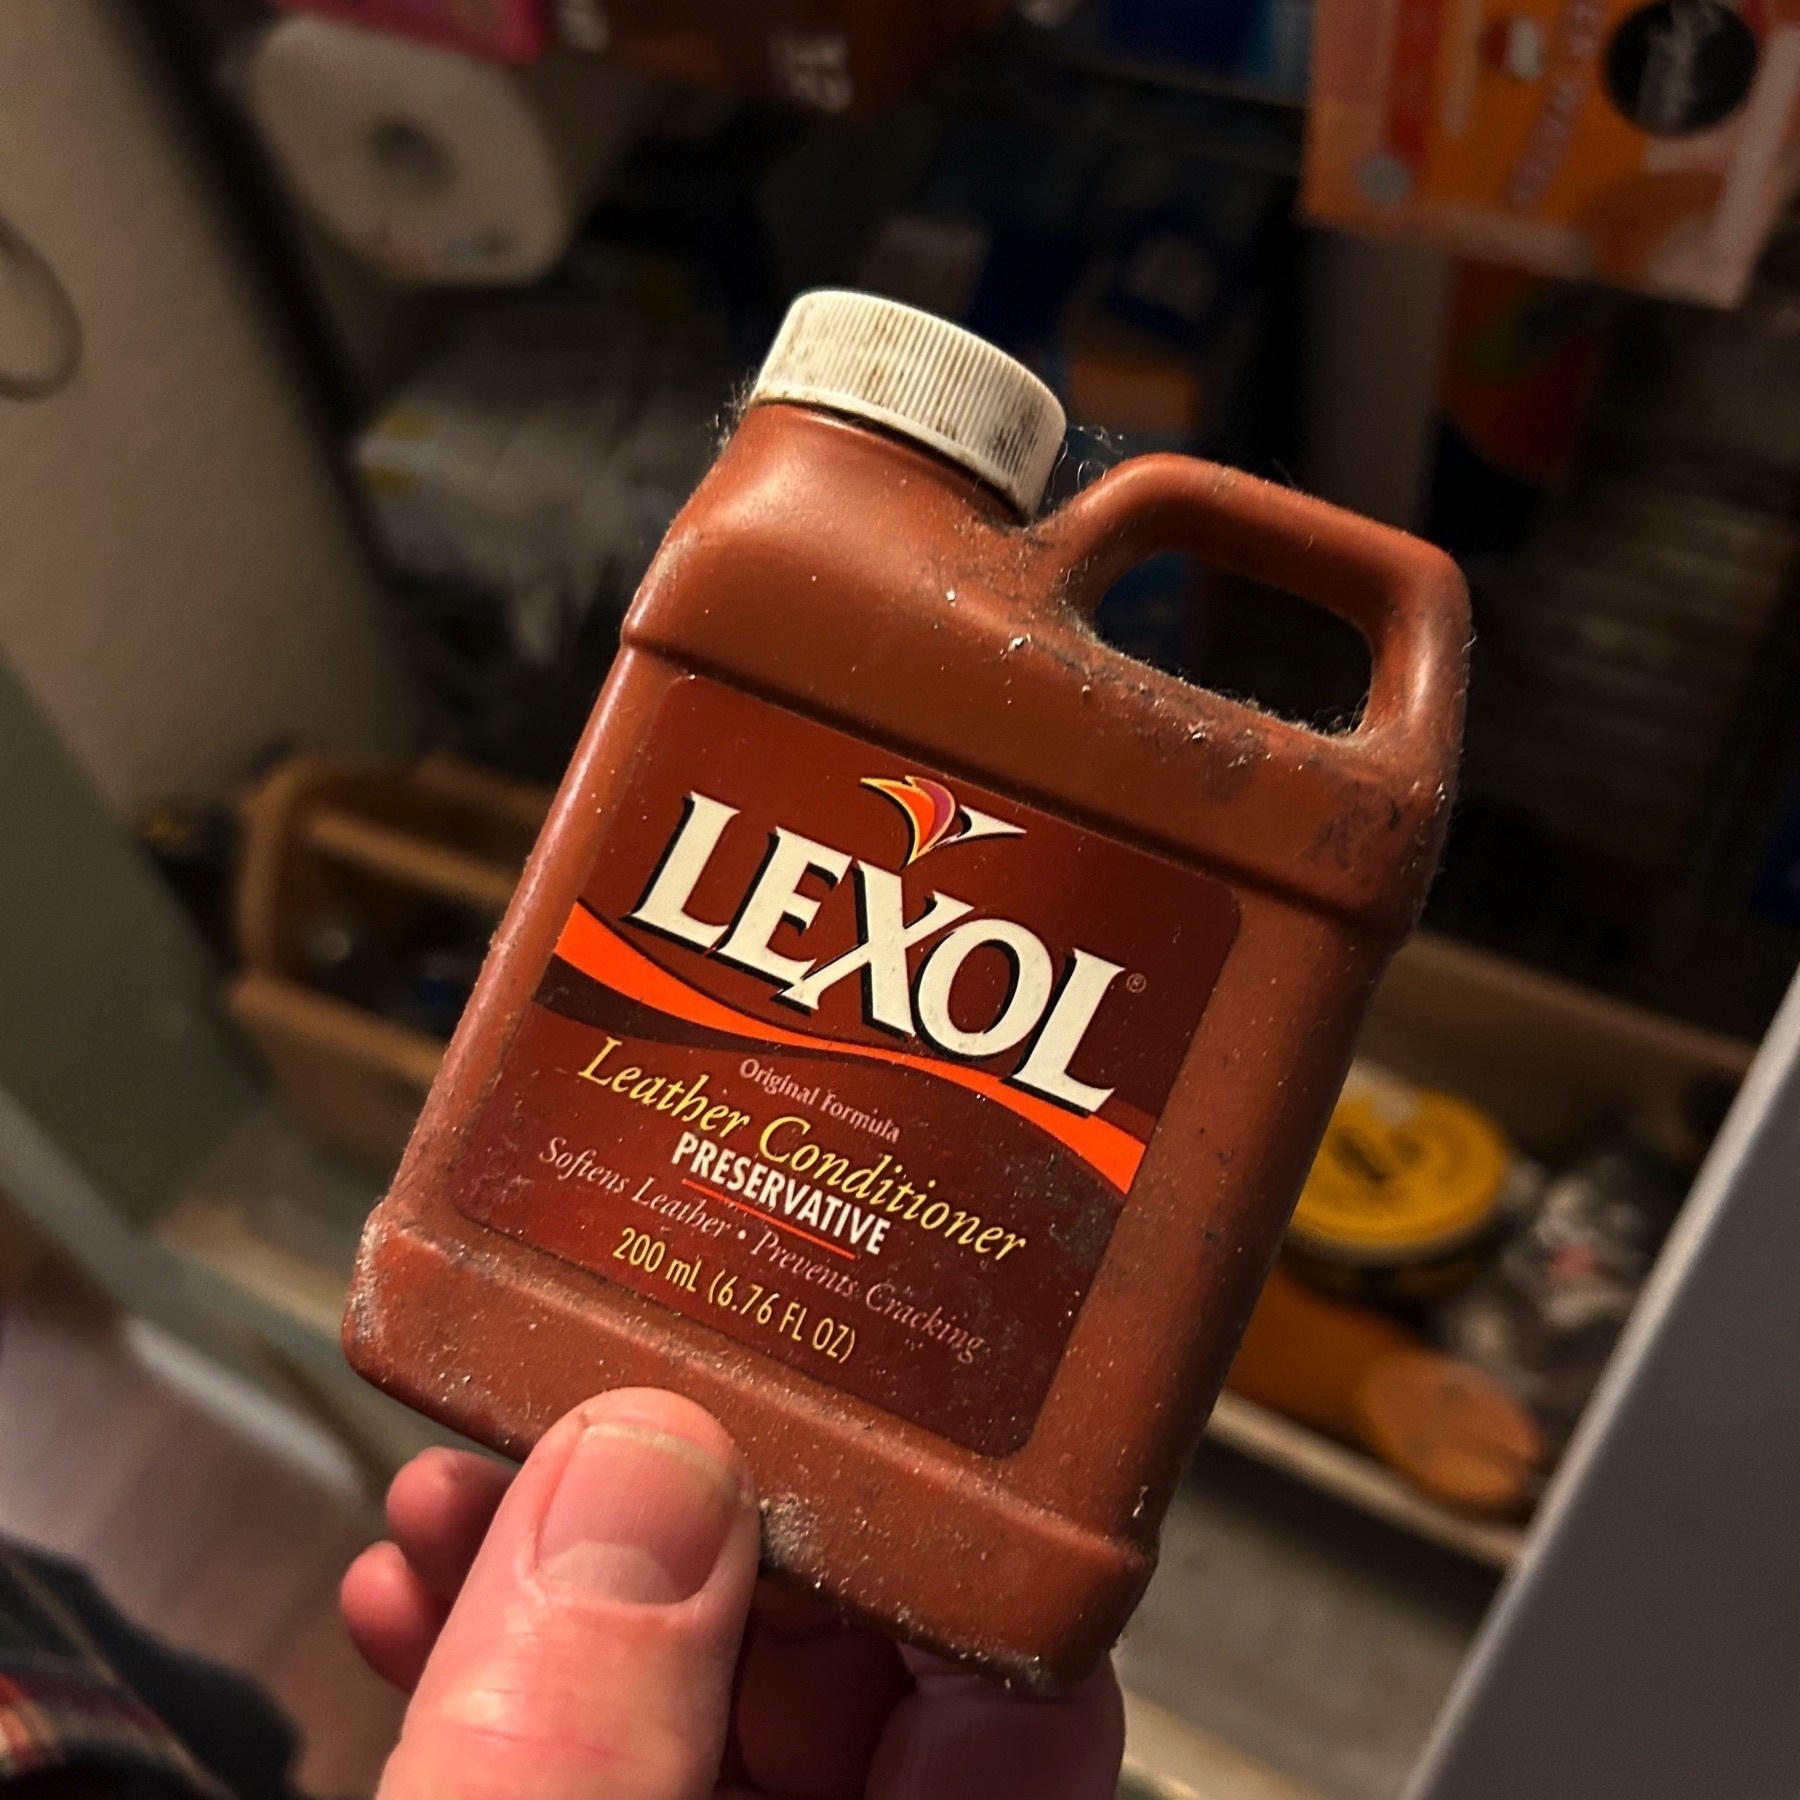 A small container of Lexol brand leather condition. The container reads: “Preservative” “Softens Leather • Prevents Cracking”